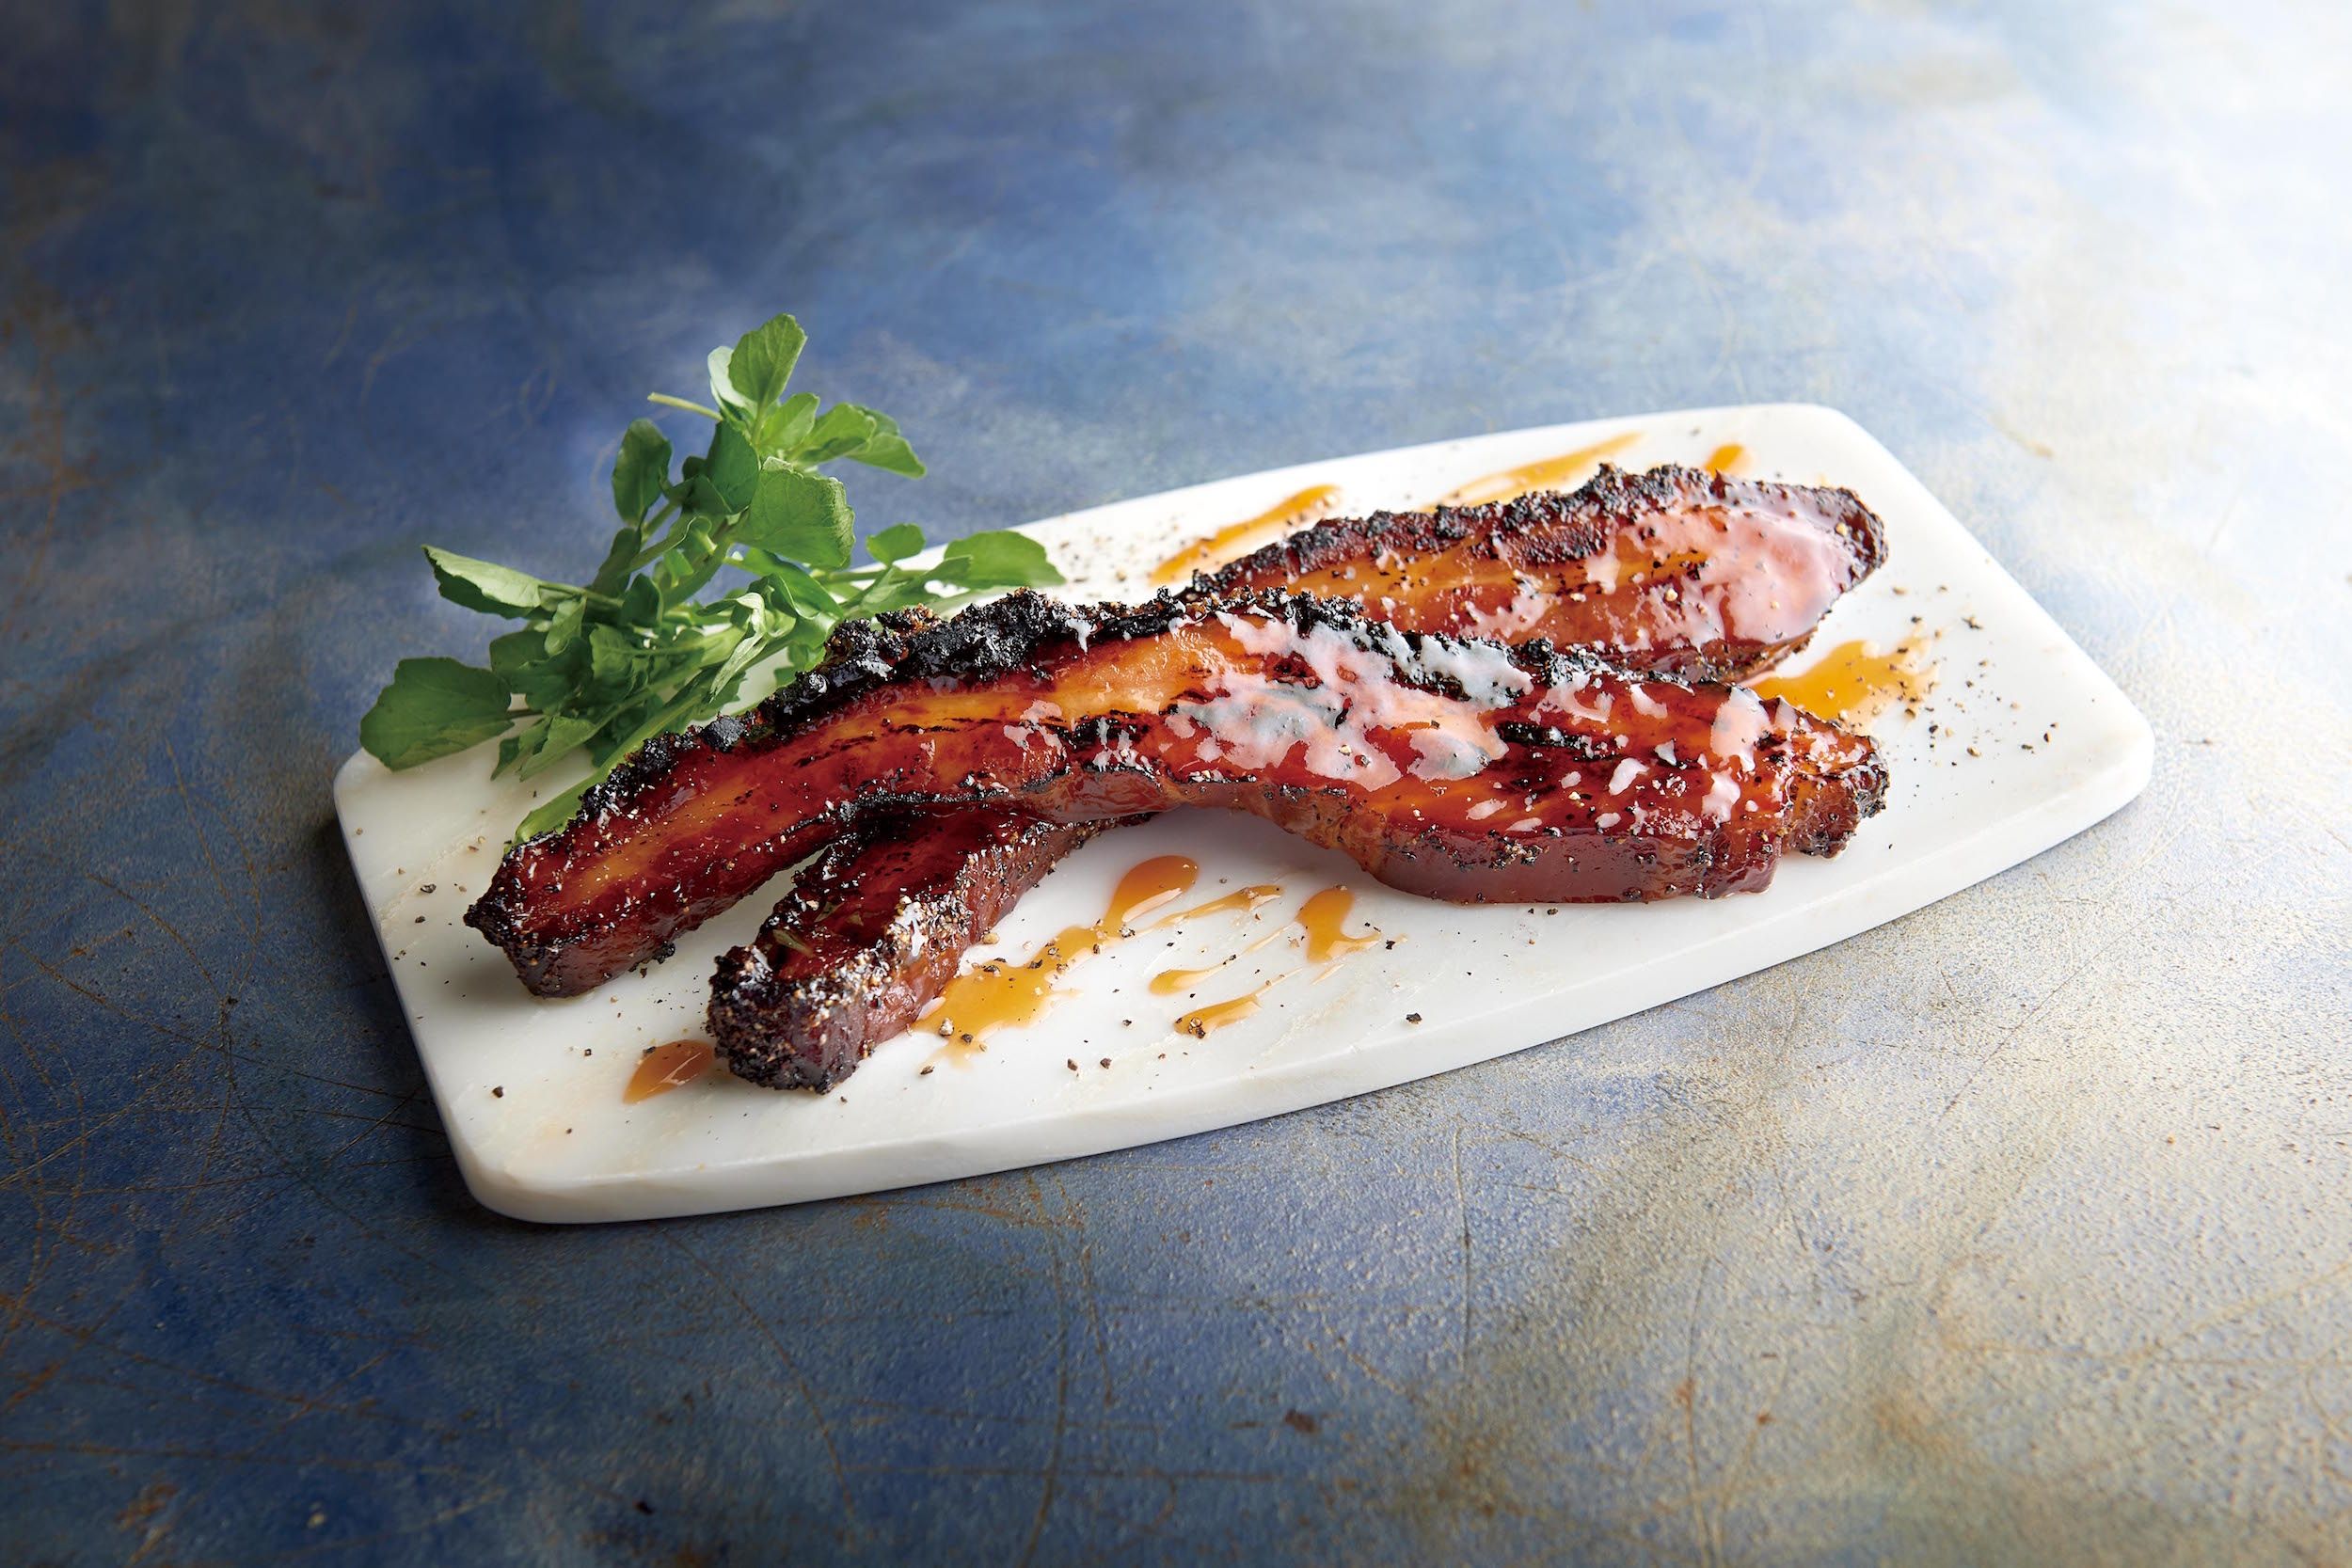 New eats: Beefbar and Morton’s reveal new spring menus starring beef and bacon